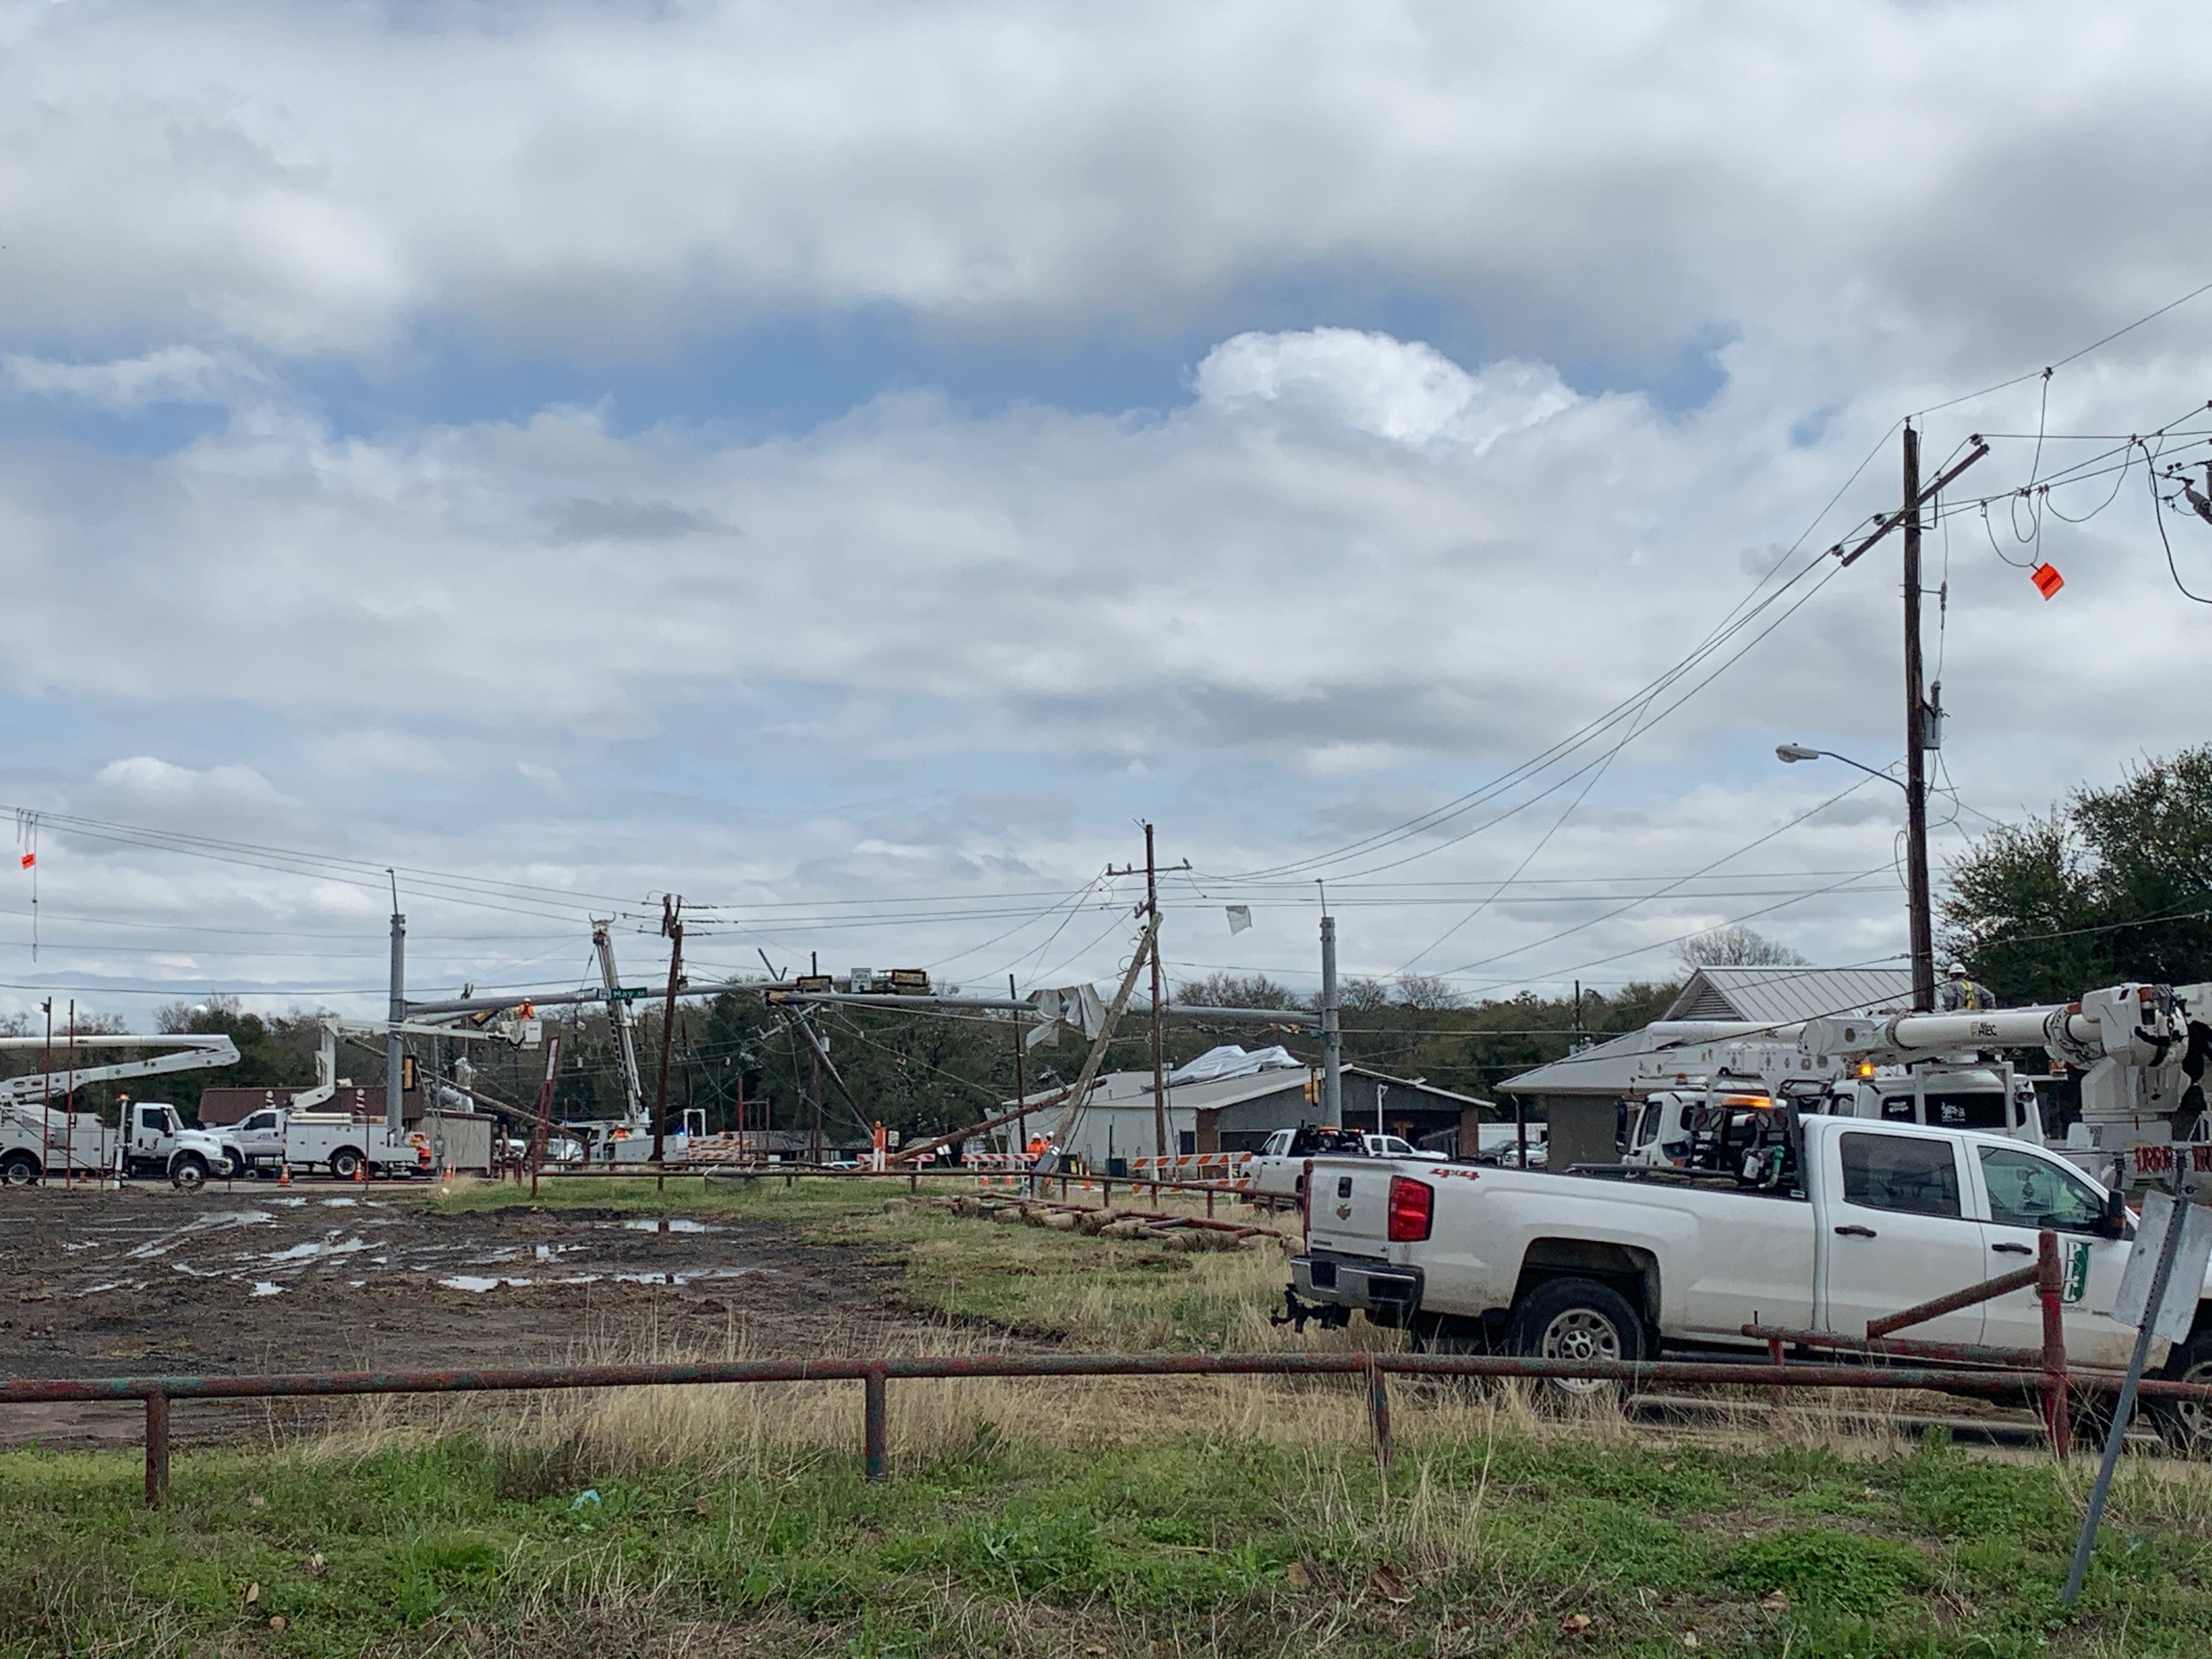 Photo of extensive damage in Madisonville following severe storms.